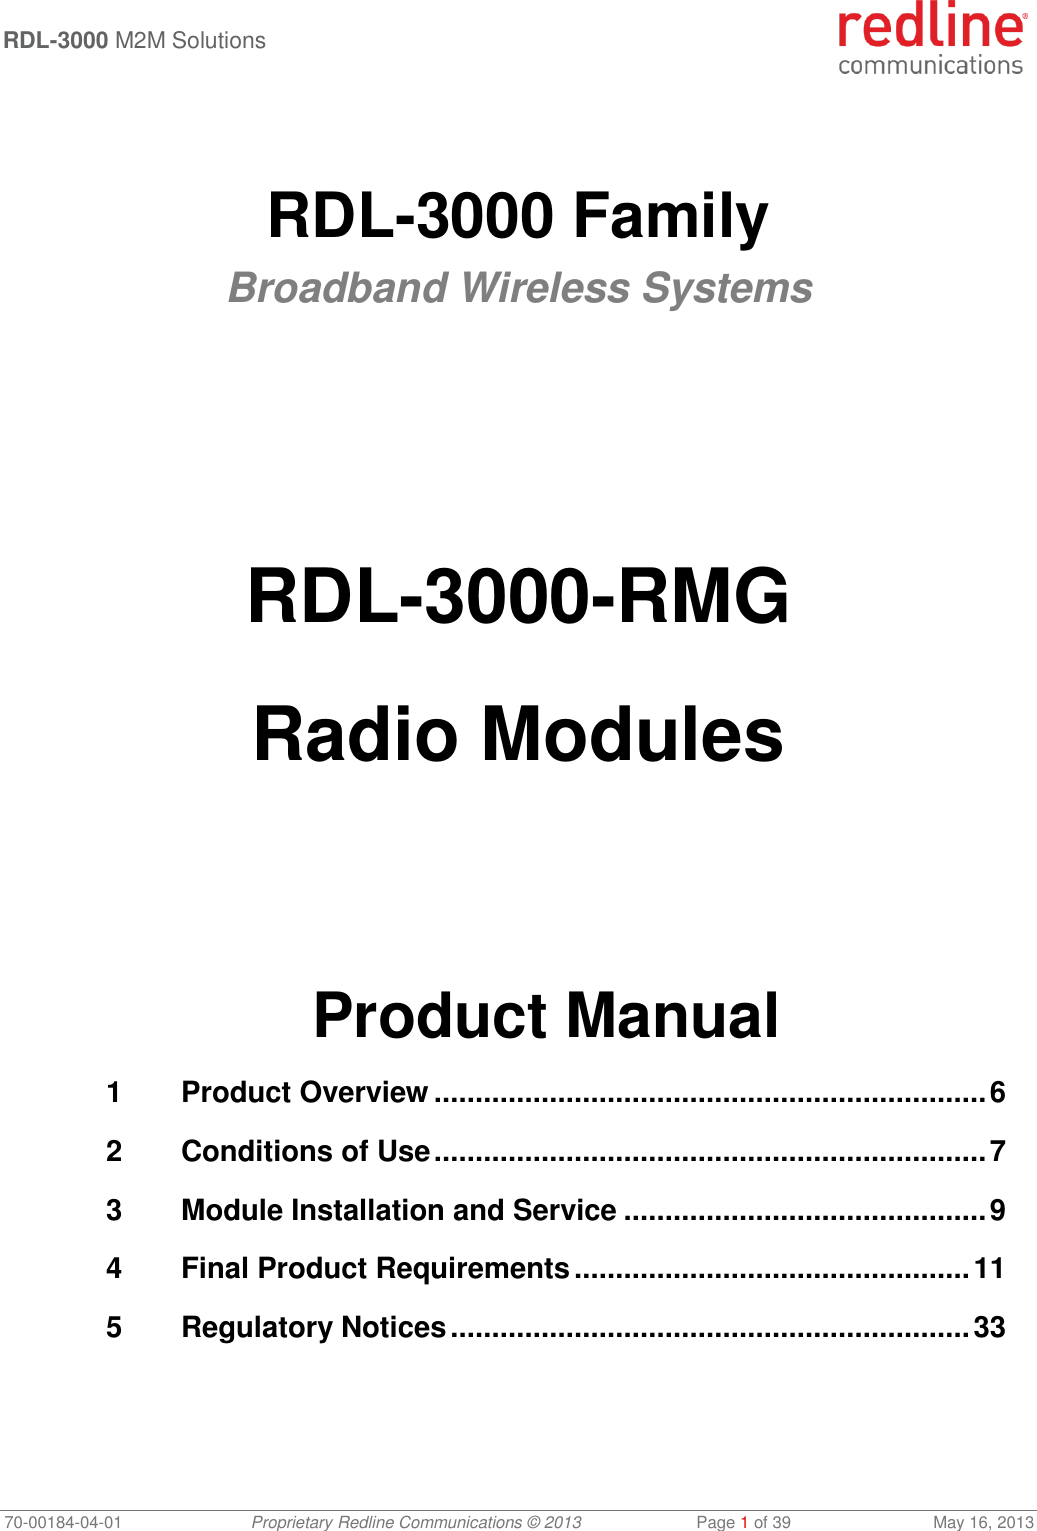  RDL-3000 M2M Solutions   70-00184-04-01 Proprietary Redline Communications © 2013  Page 1 of 39  May 16, 2013   RDL-3000 Family Broadband Wireless Systems        RDL-3000-RMG  Radio Modules       Product Manual 1 Product Overview ................................................................... 6 2 Conditions of Use ................................................................... 7 3 Module Installation and Service ............................................ 9 4 Final Product Requirements ................................................ 11 5 Regulatory Notices ............................................................... 33 